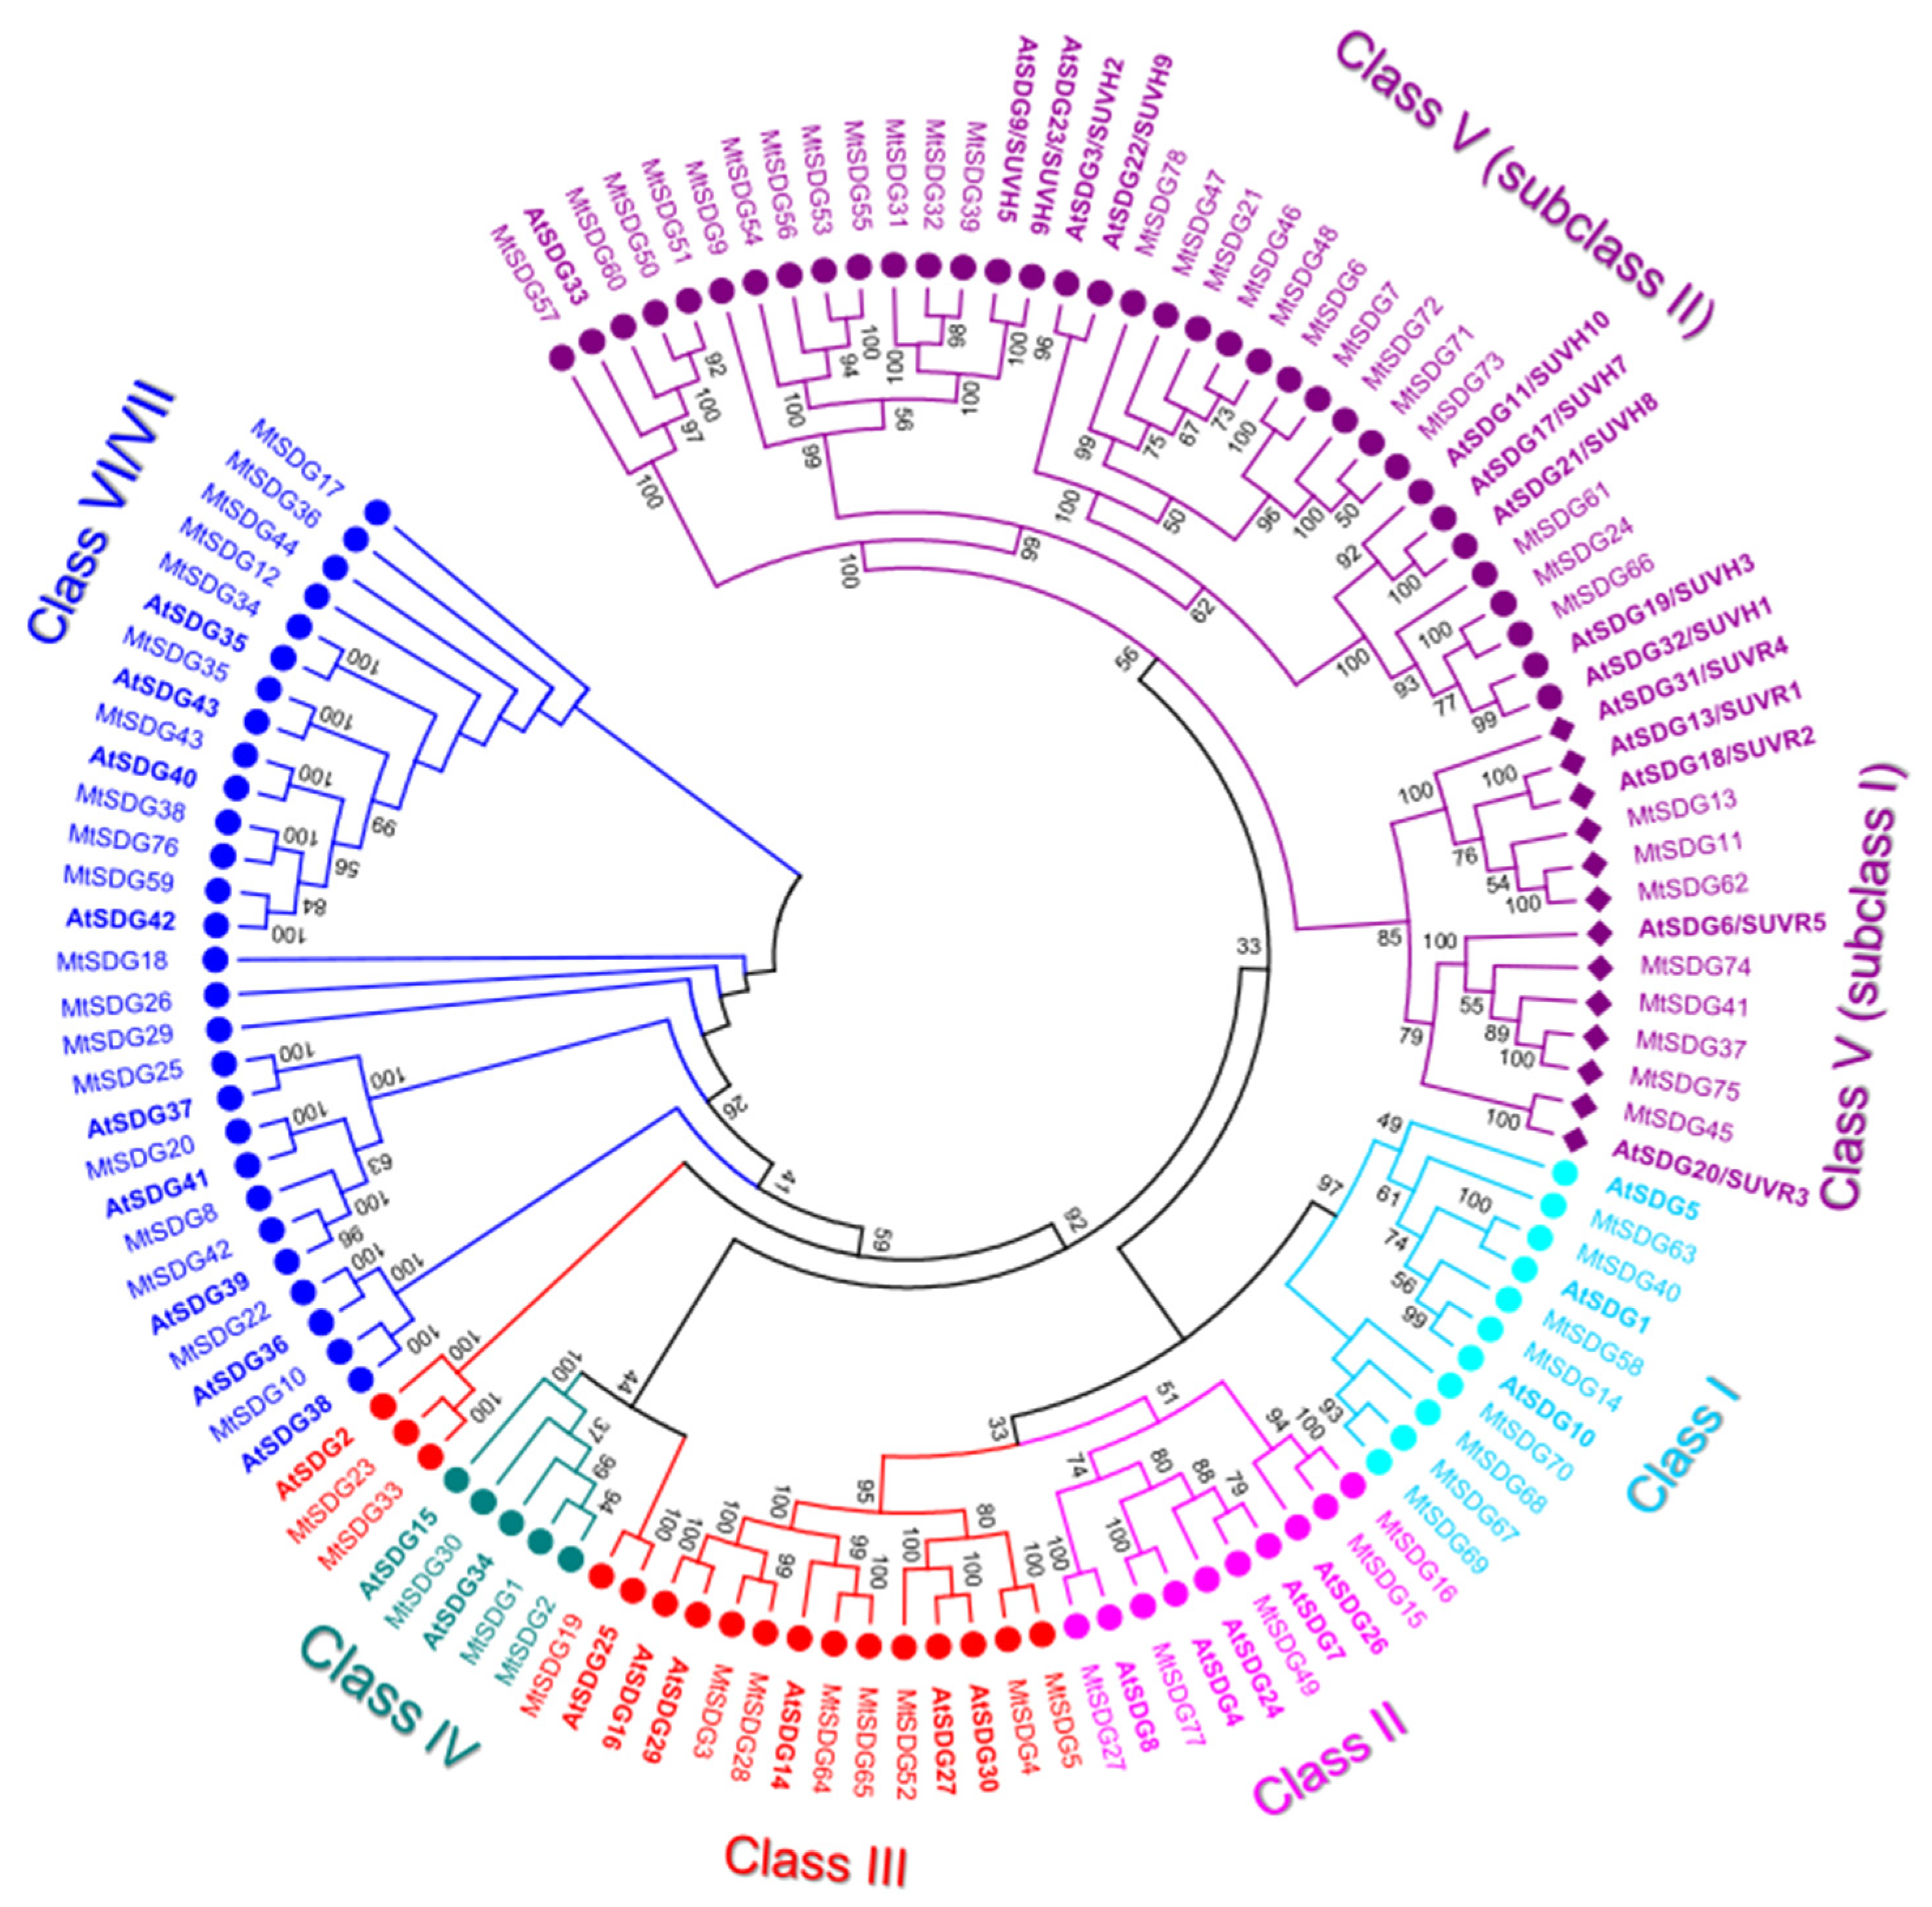 Plants | Free Full-Text | Genome-Wide Identification of Histone  Modification Gene Families in the Model Legume Medicago truncatula and  Their Expression Analysis in Nodules